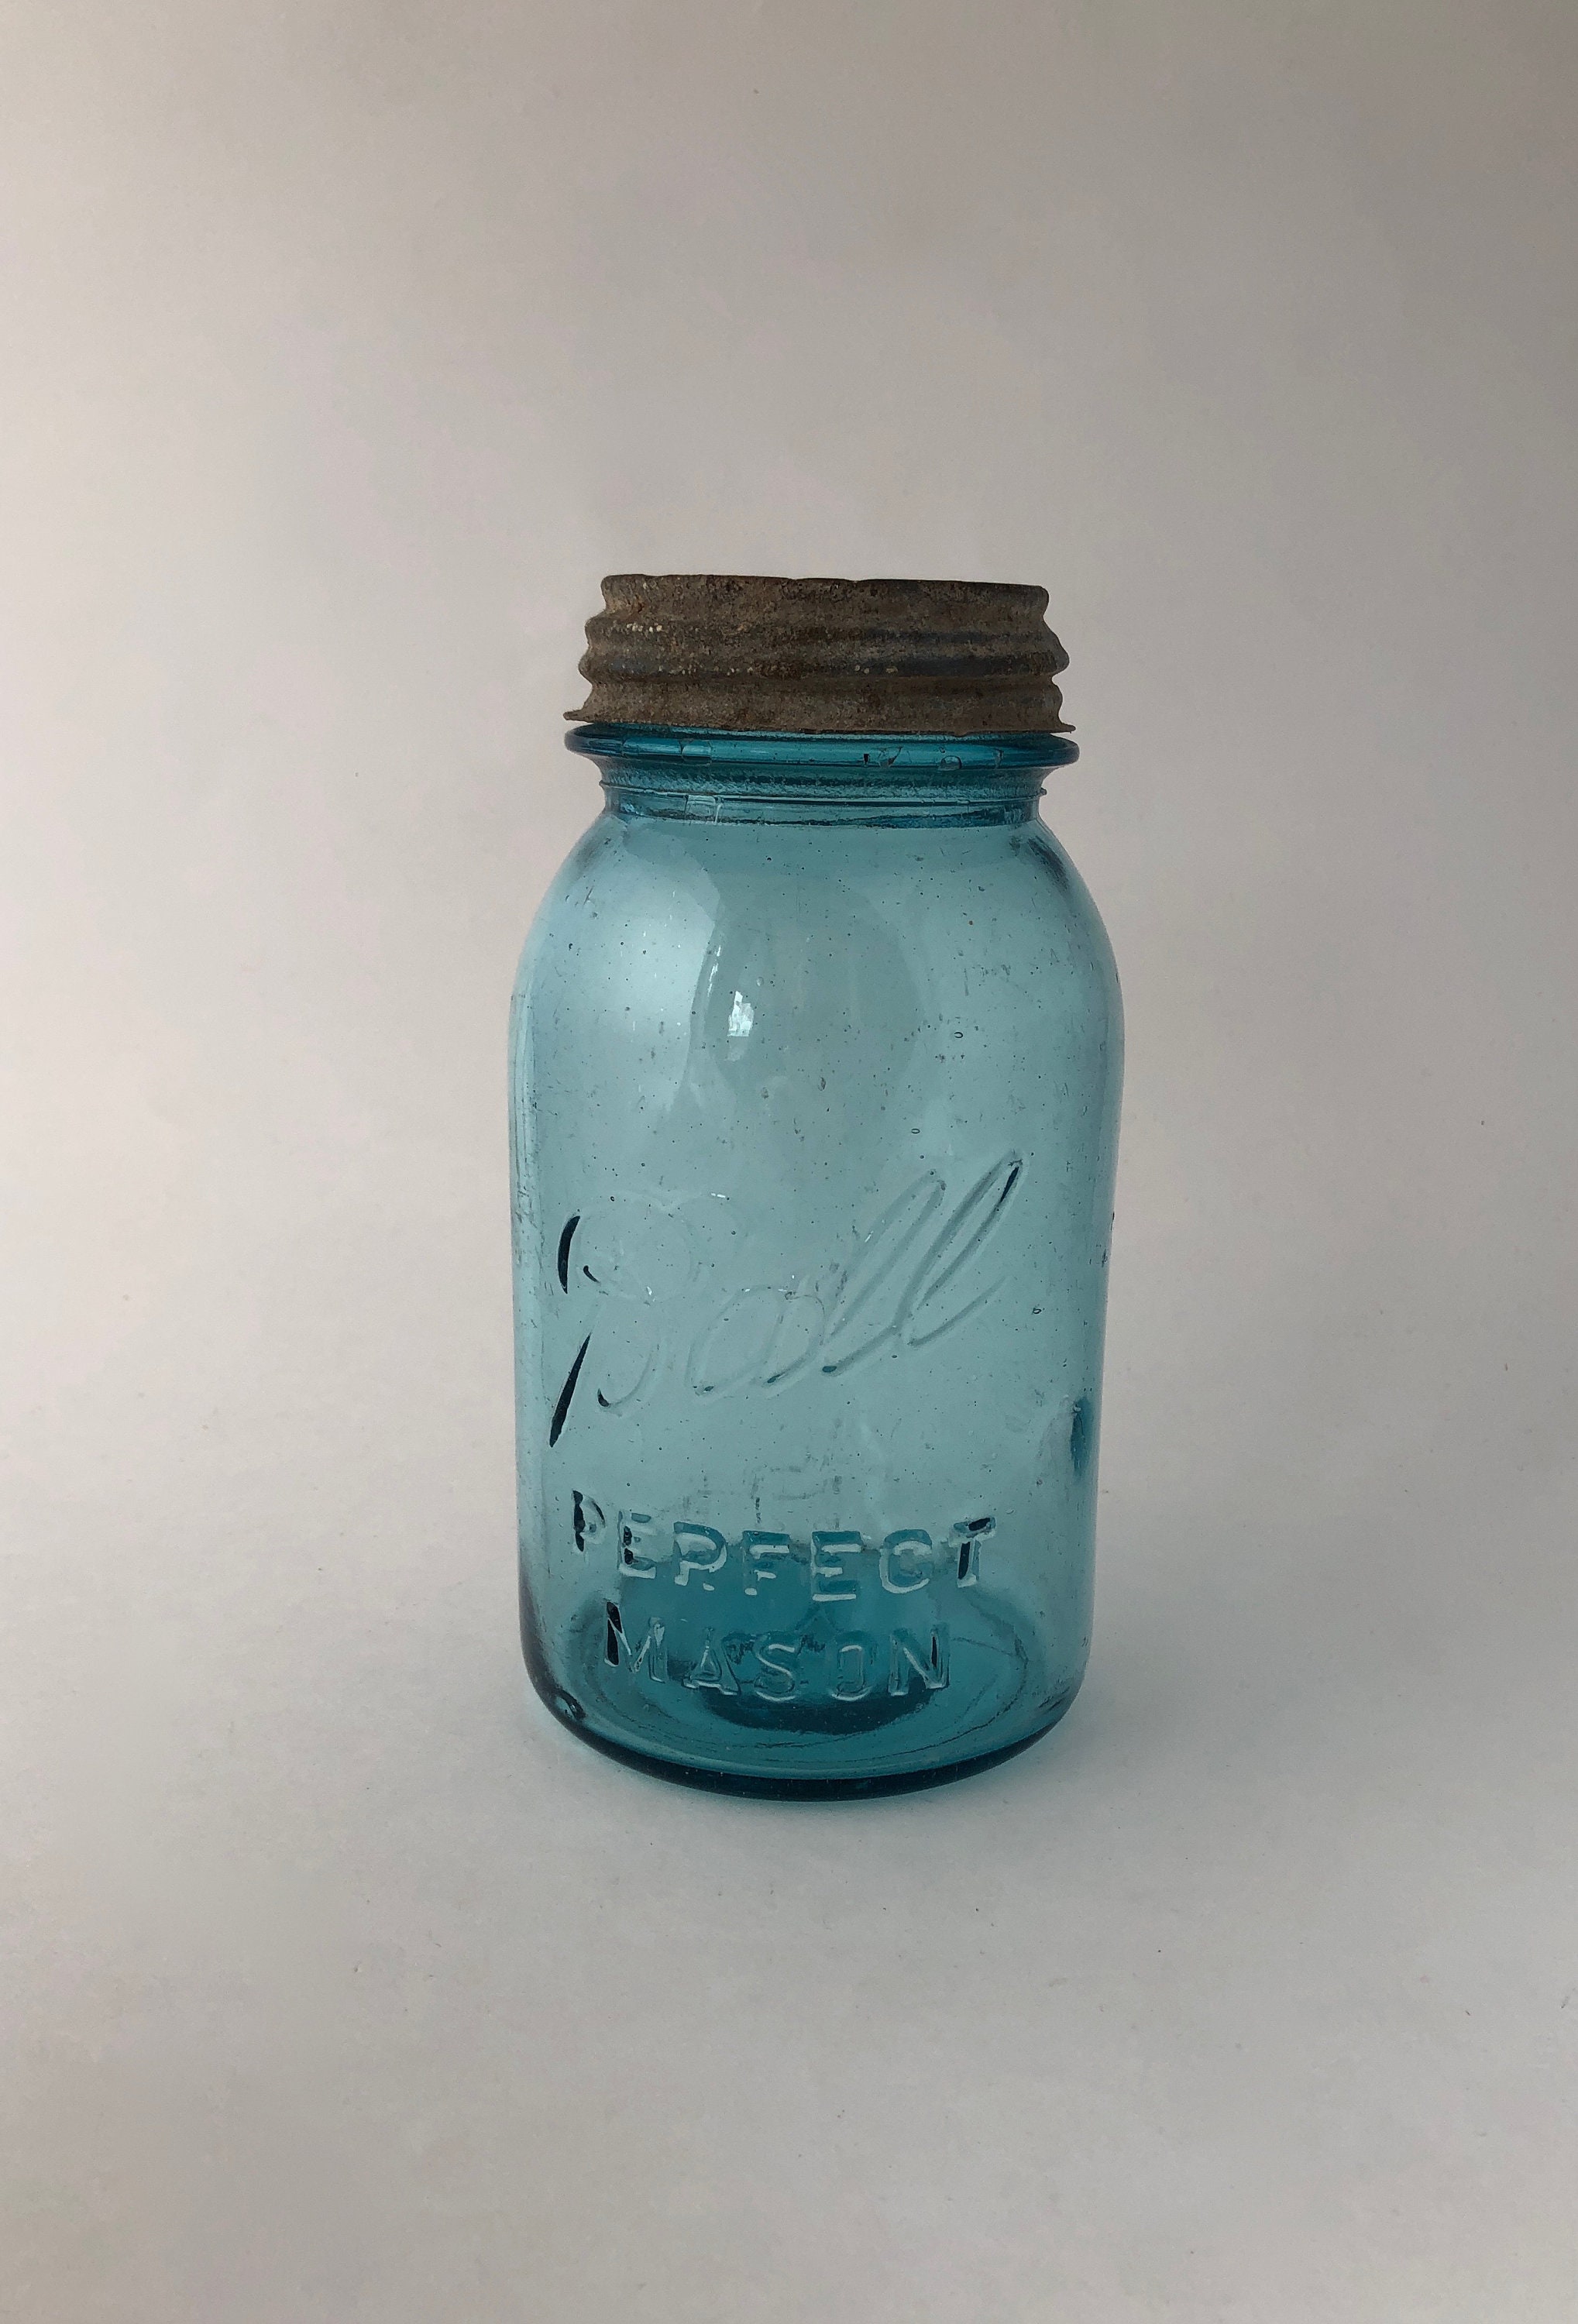 Blue Fruit Jar Antiques - Came across this really nice Abu Garcia